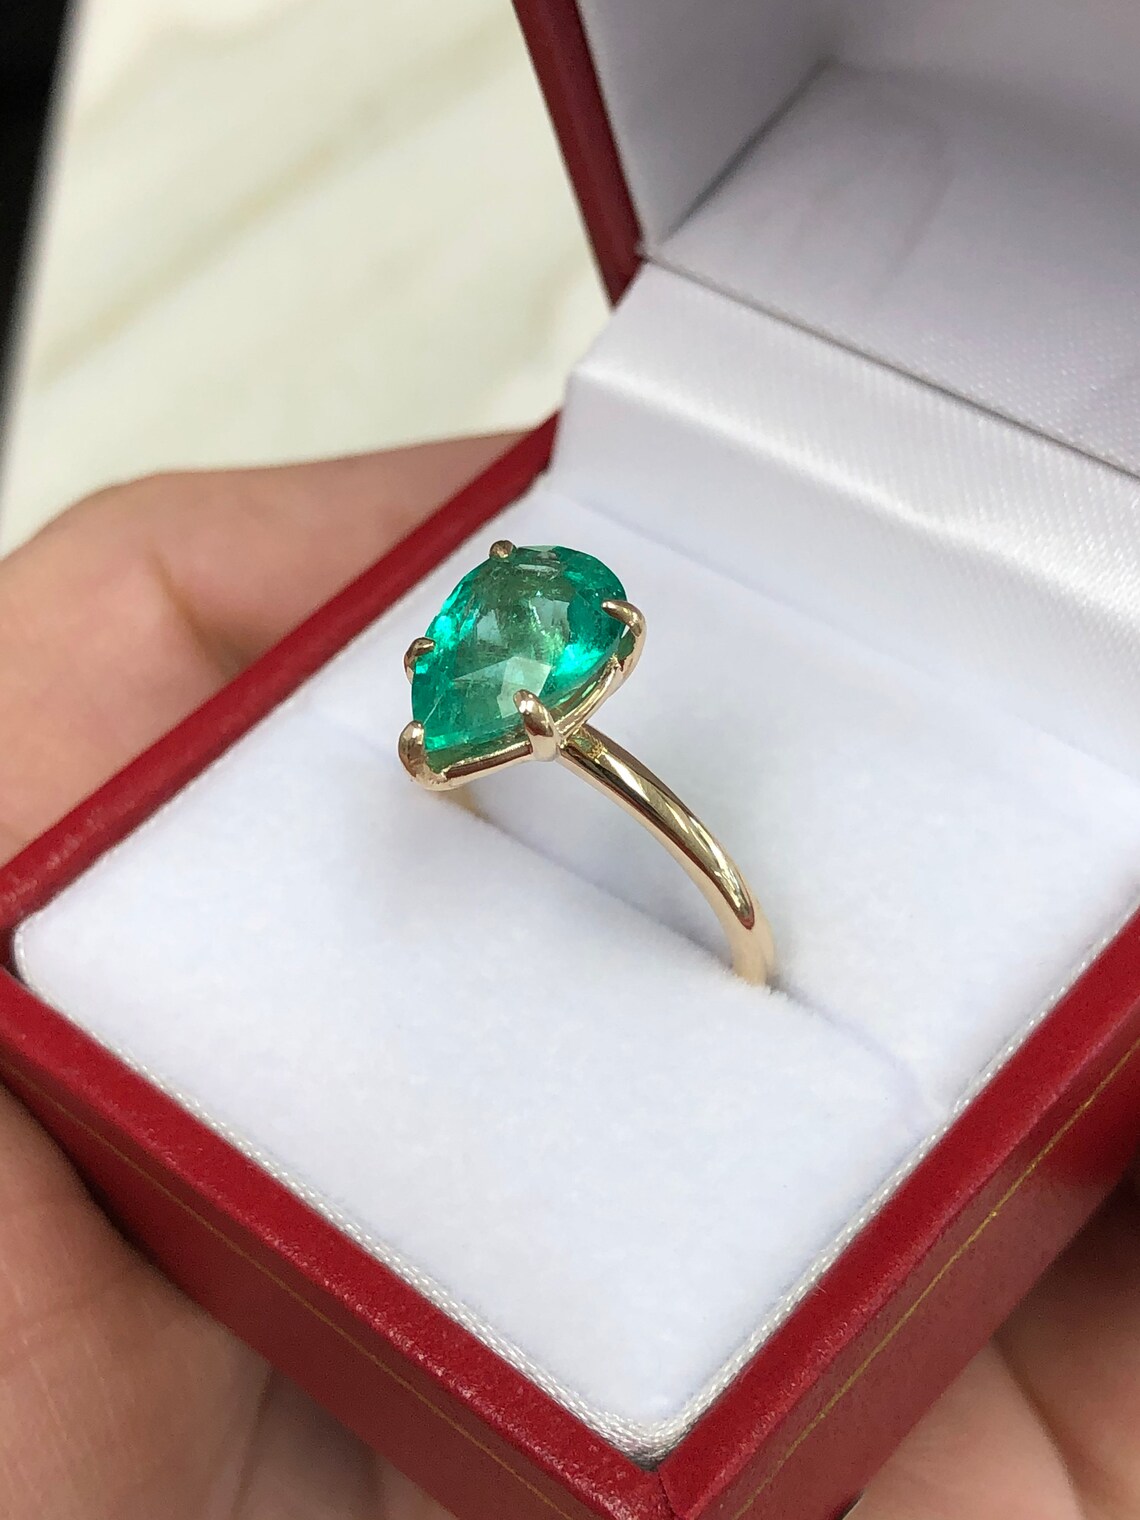 2.24 Carats Colombian Emerald Solitaire Gold Engagement Ring | Etsy